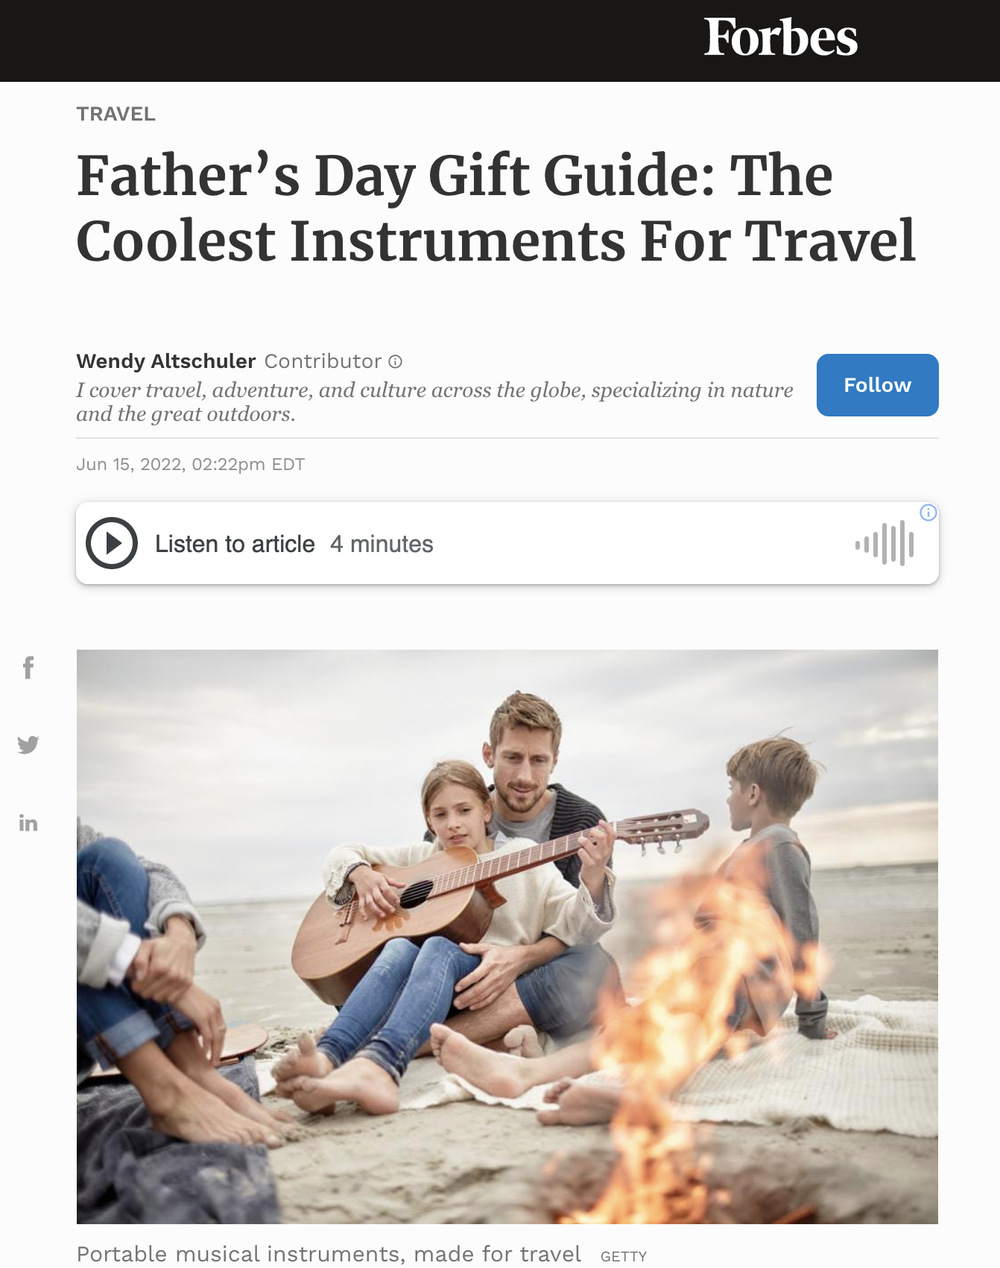 Father’s Day Gift Guide: The Coolest Instruments For Travel